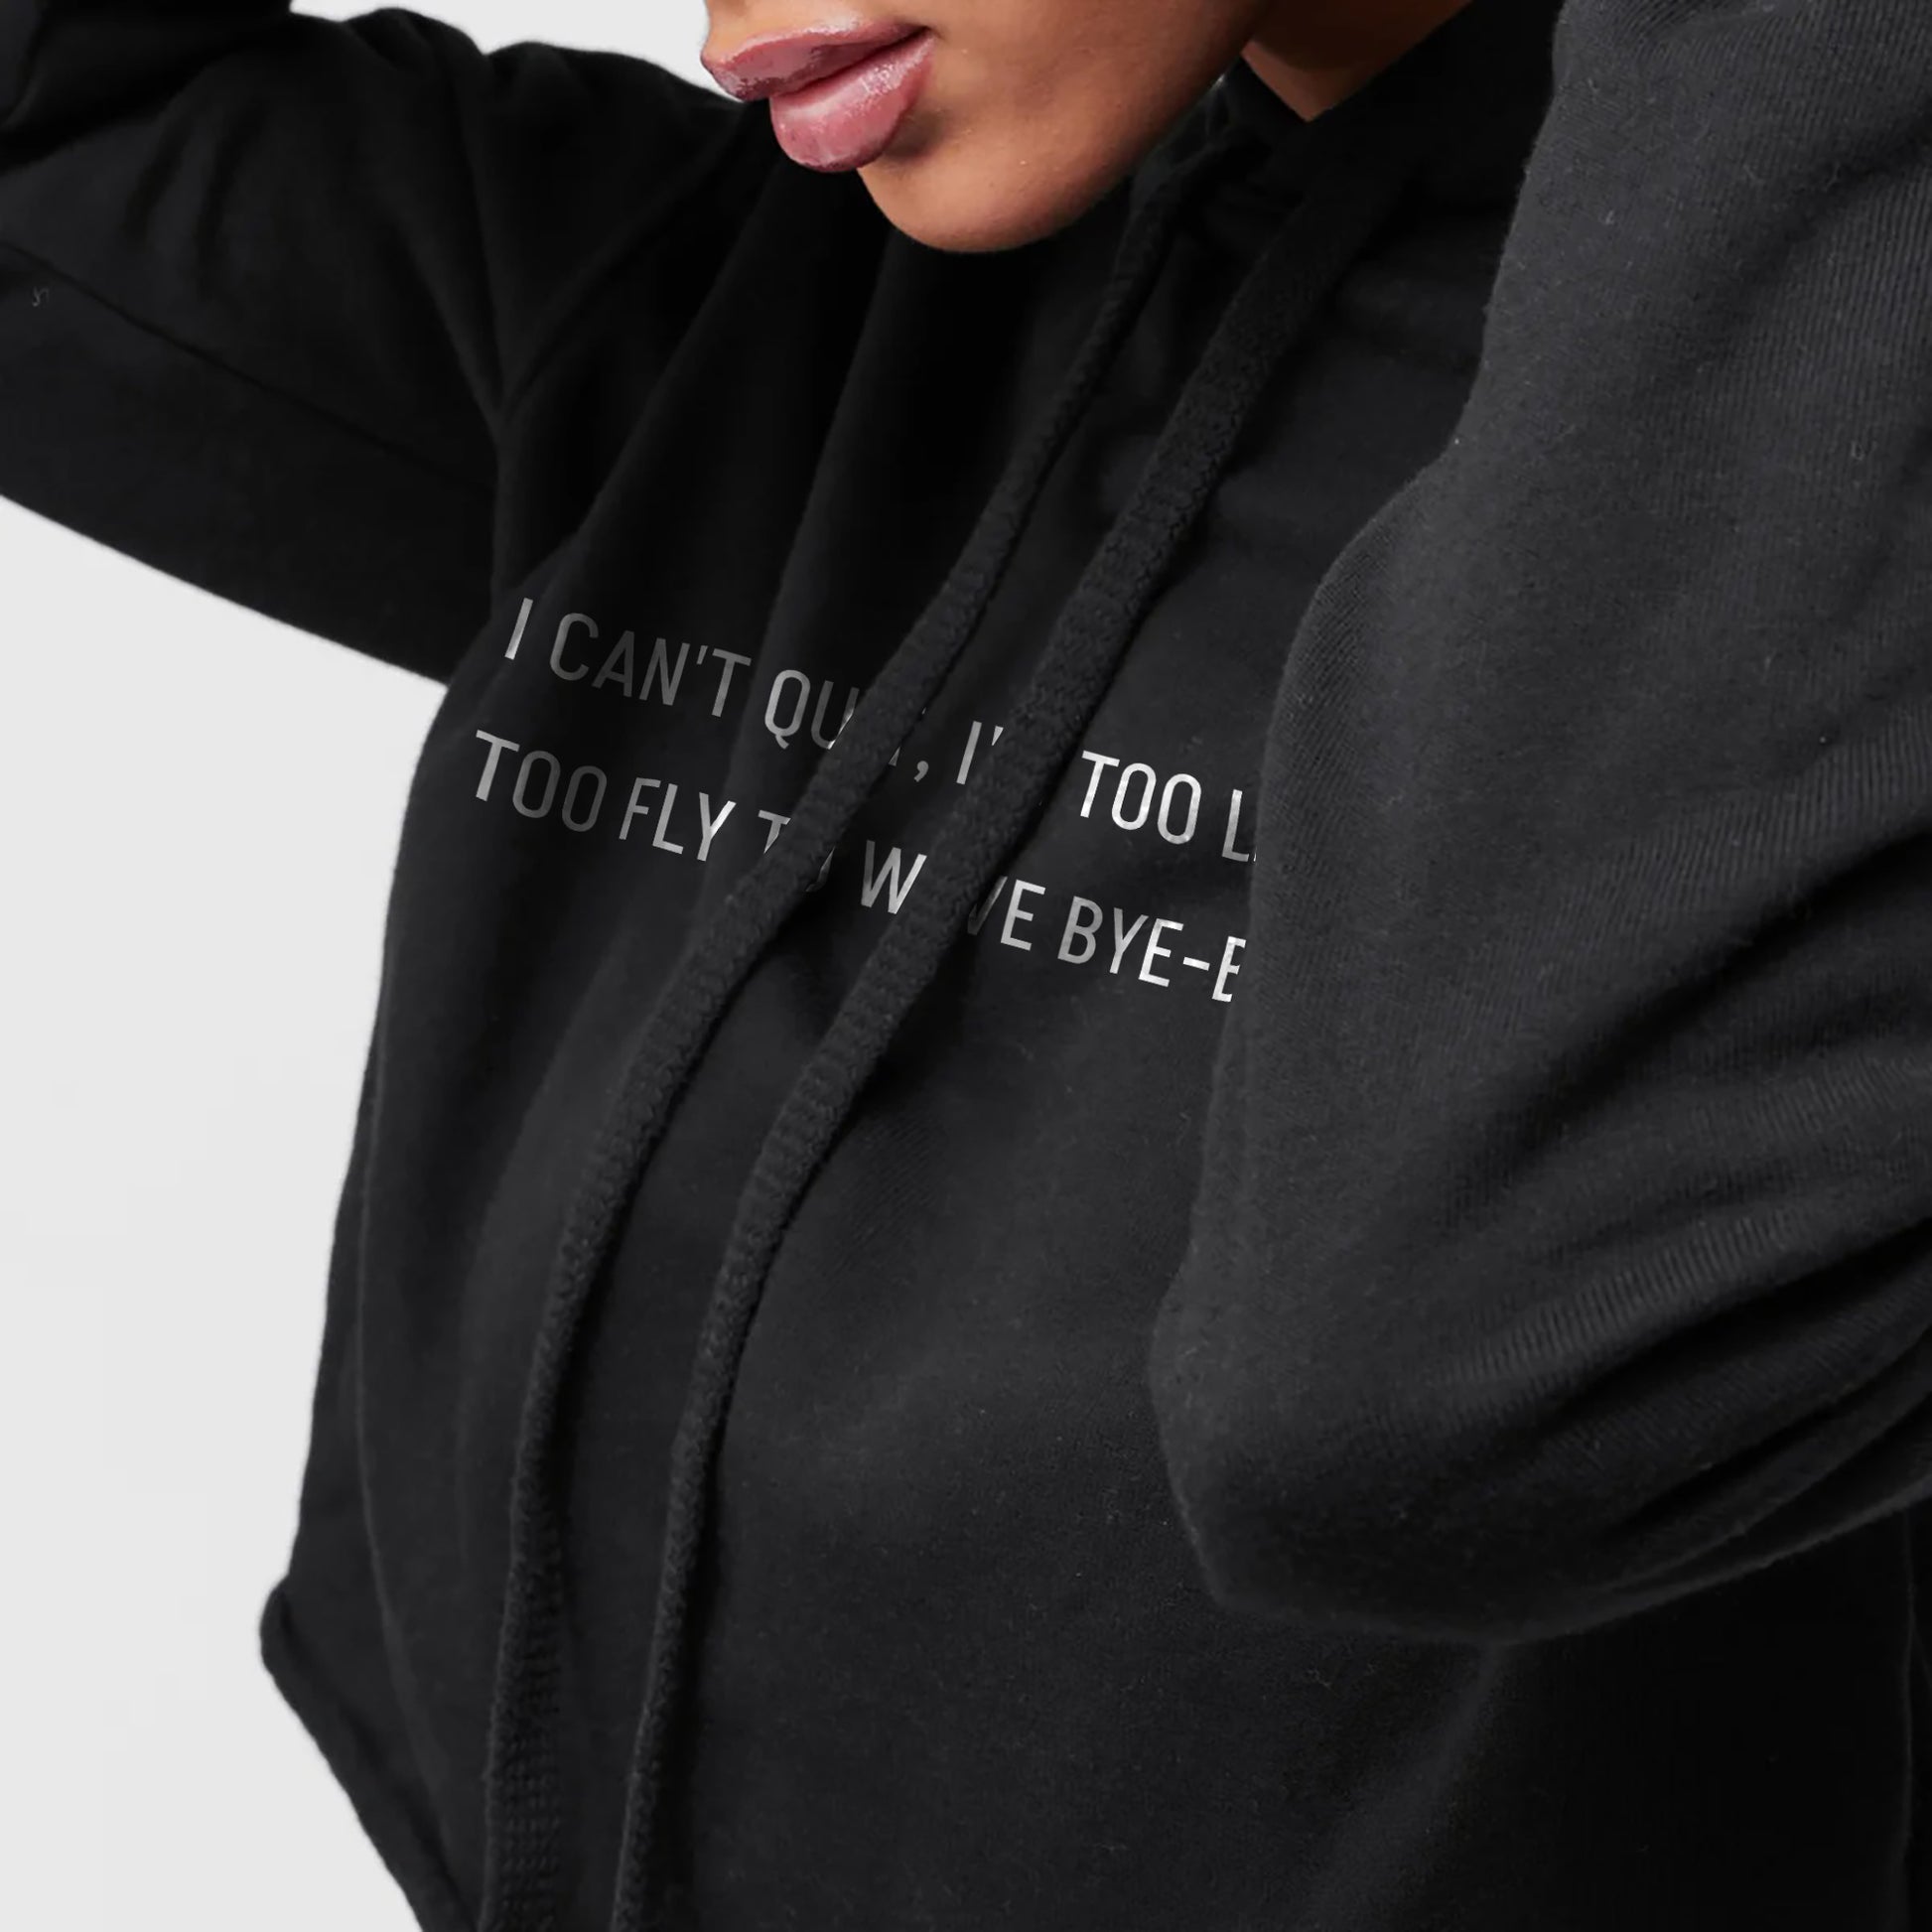 Too Lit to Quit, Too Fly to Wave Bye-Bye Cropped Hoodie Solid Black Closeup Artwork and Texture